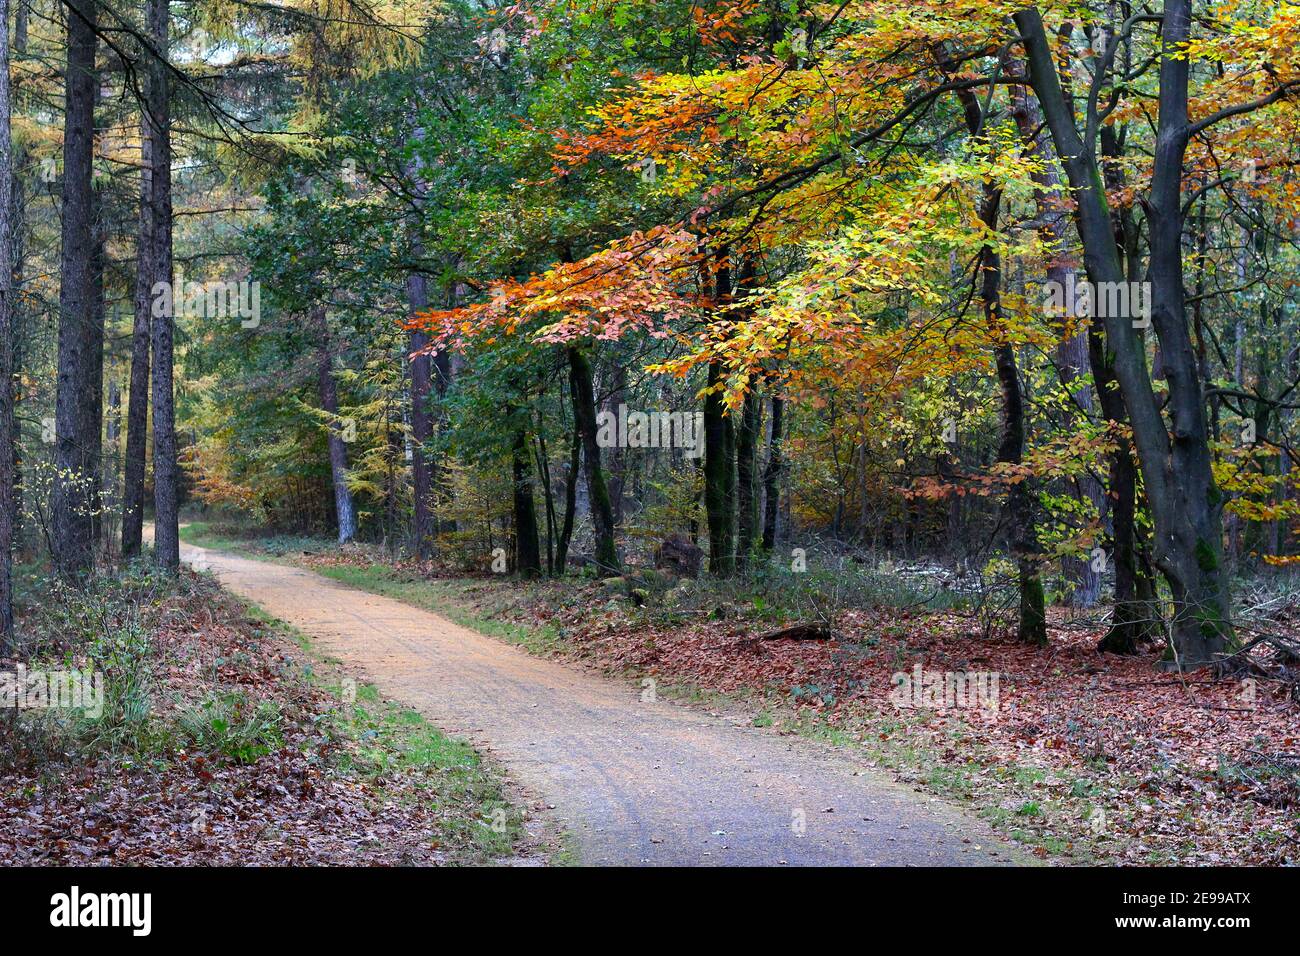 Dutch forest Veluwe in autumn near city of Arnhem with a bicycle path, the beech trees are having colorful leaves Stock Photo